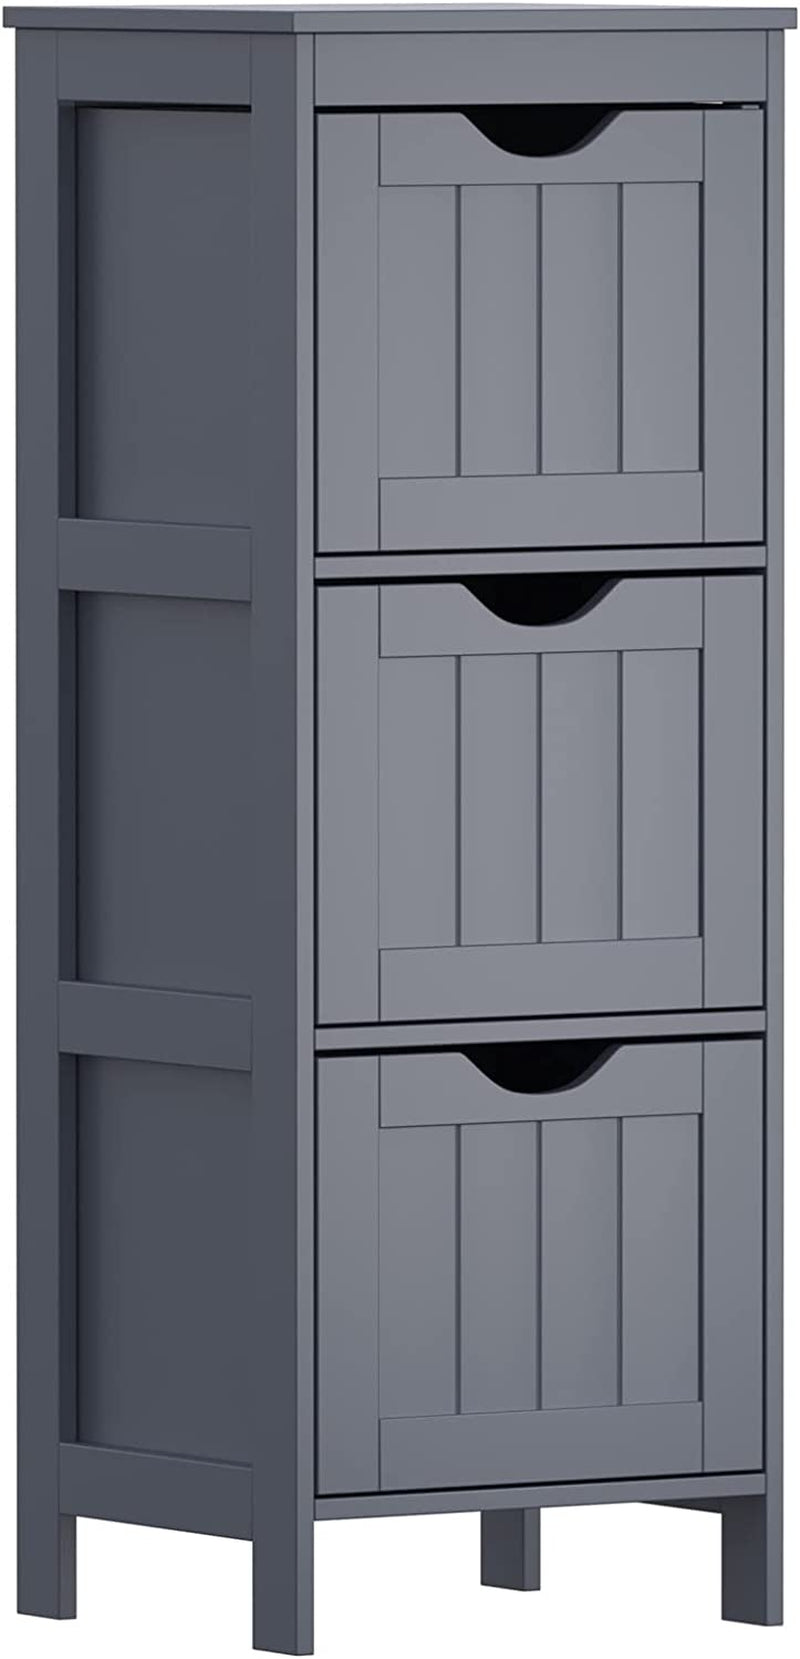 Reettic Narrow Bathroom Storage Cabinet with 3 Removable Drawers, DIY, Freestanding Side Storage Organizer for Bedroom, Living Room, Entryway, 11.8" L X 11.8" W X 35" H, Brown BYSG102Z Home & Garden > Household Supplies > Storage & Organization Reettic Dark Grey 11.8"L x 11.8"W x 35"H 